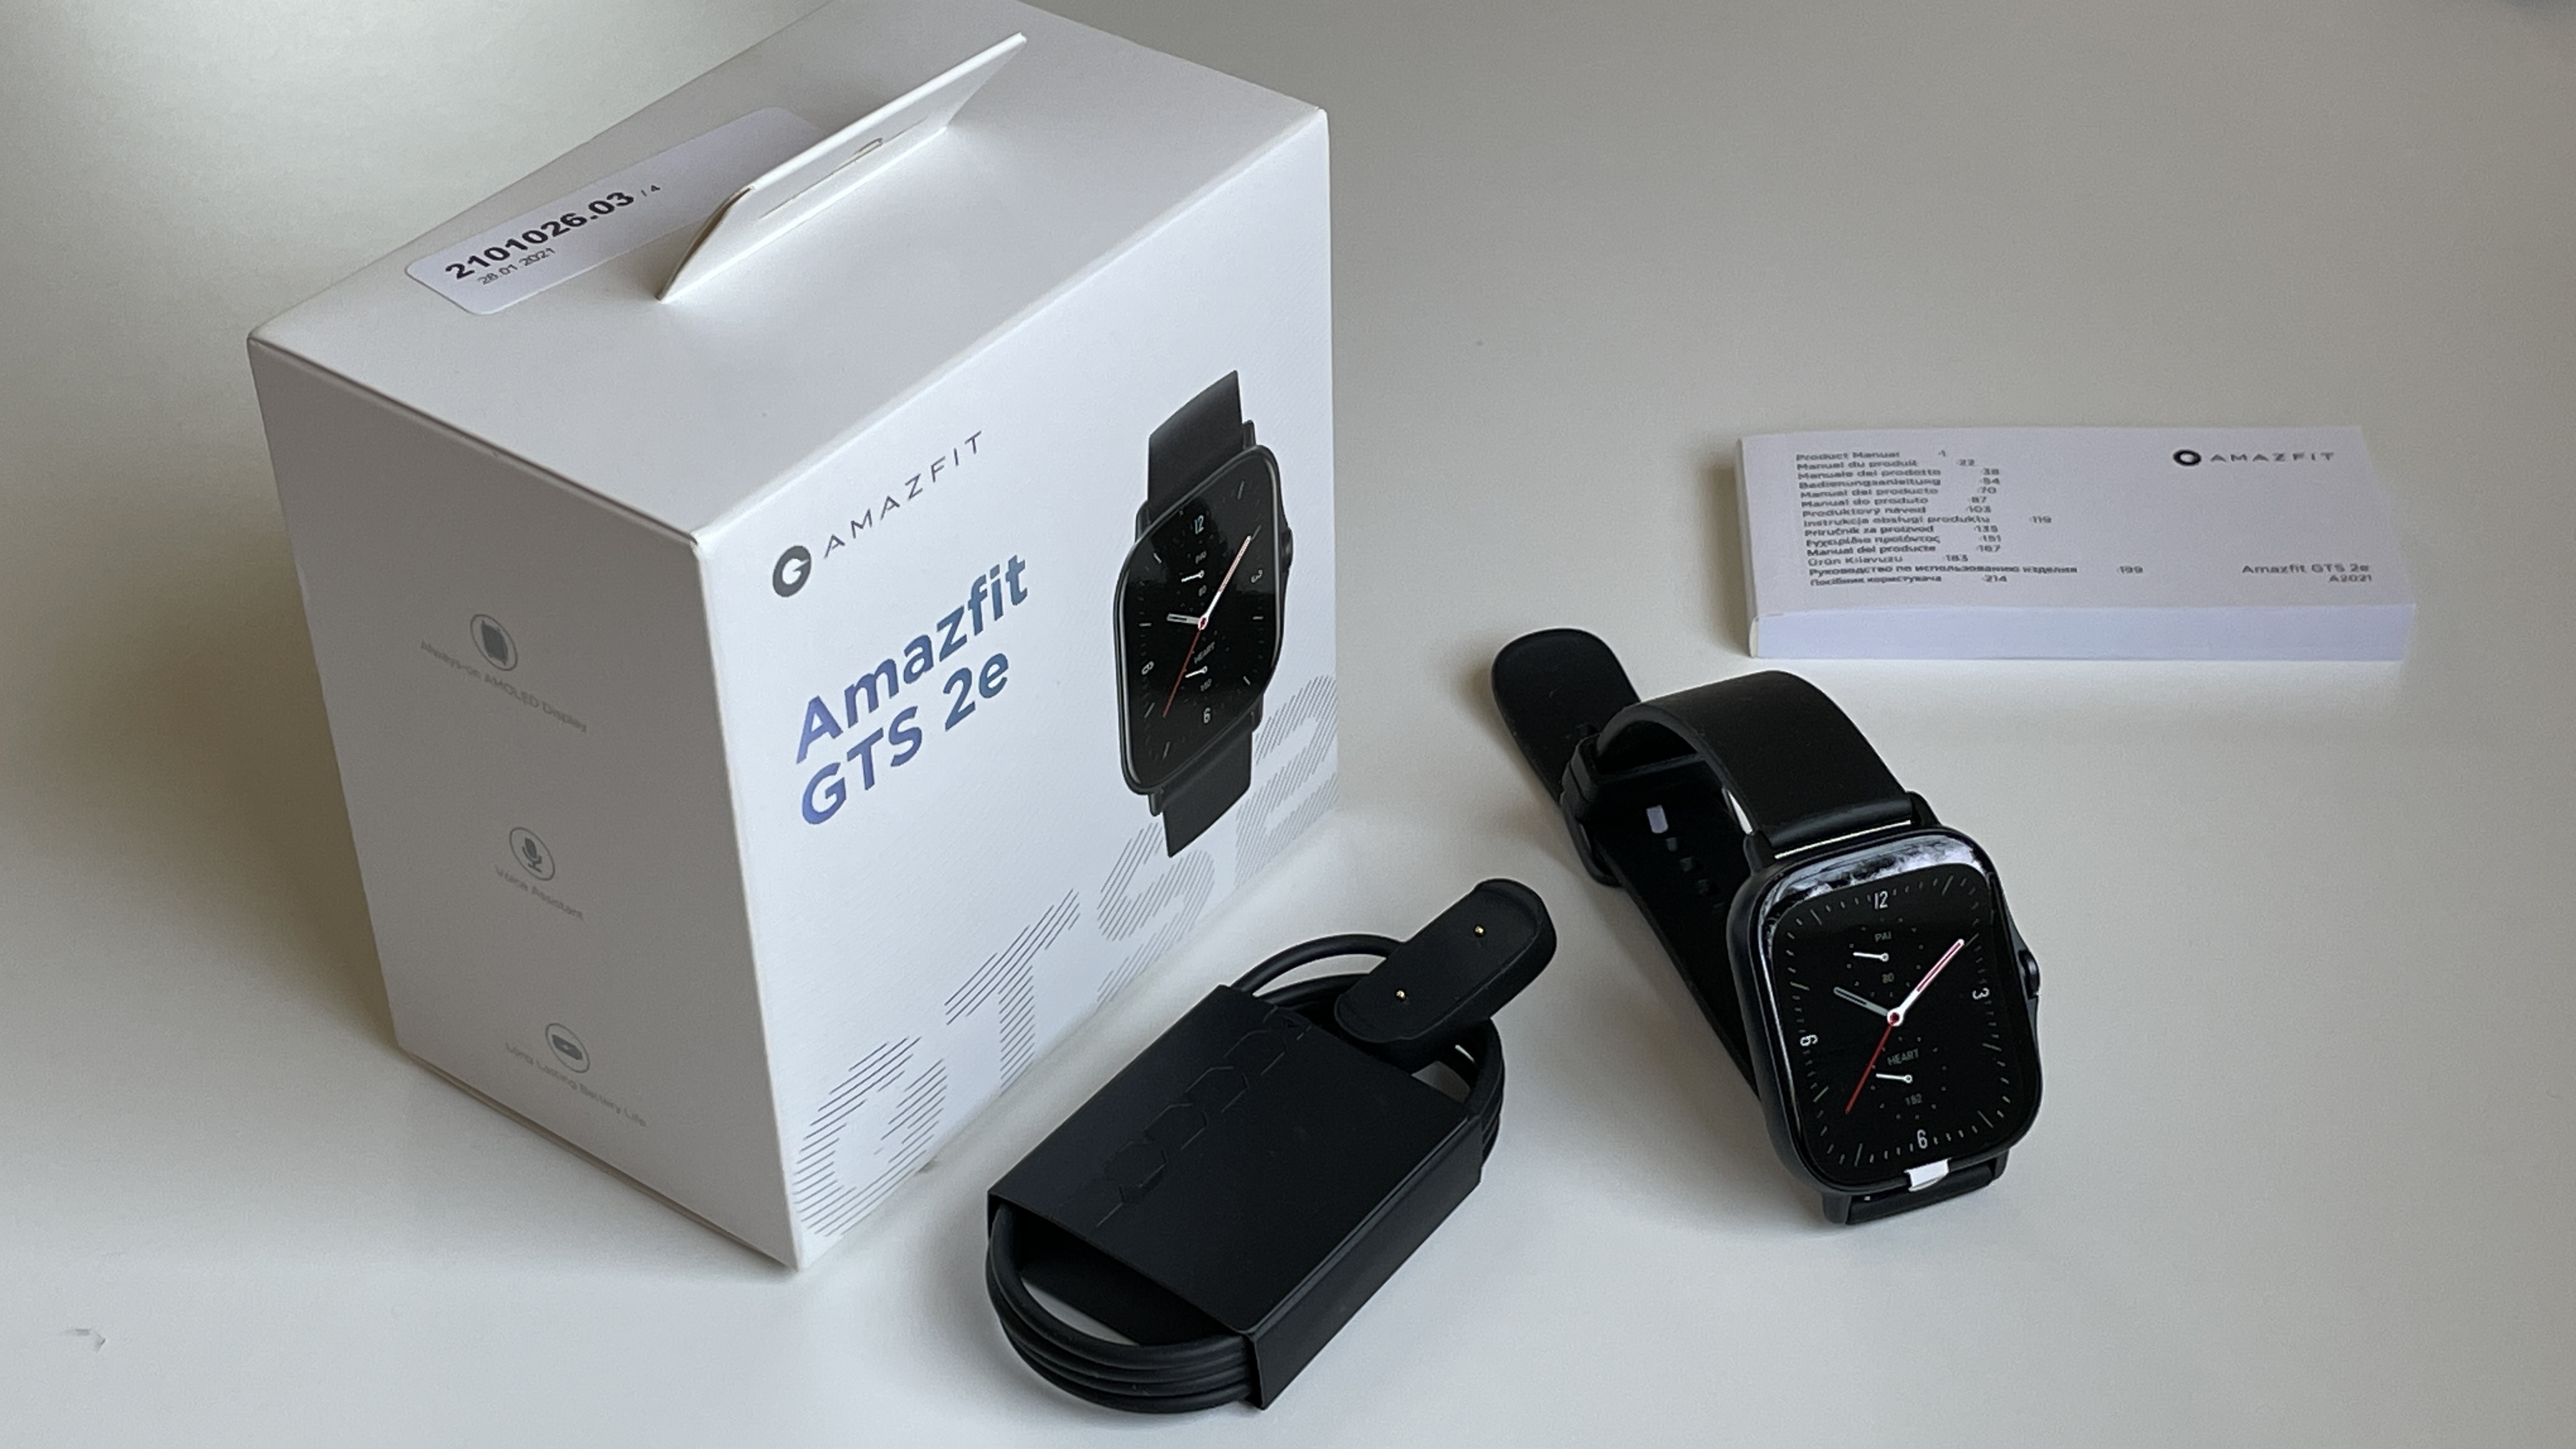 The Huami Amazfit Gts 2e Scores Points In The Smartwatch Review With Uncommon Features Notebookcheck Net Reviews